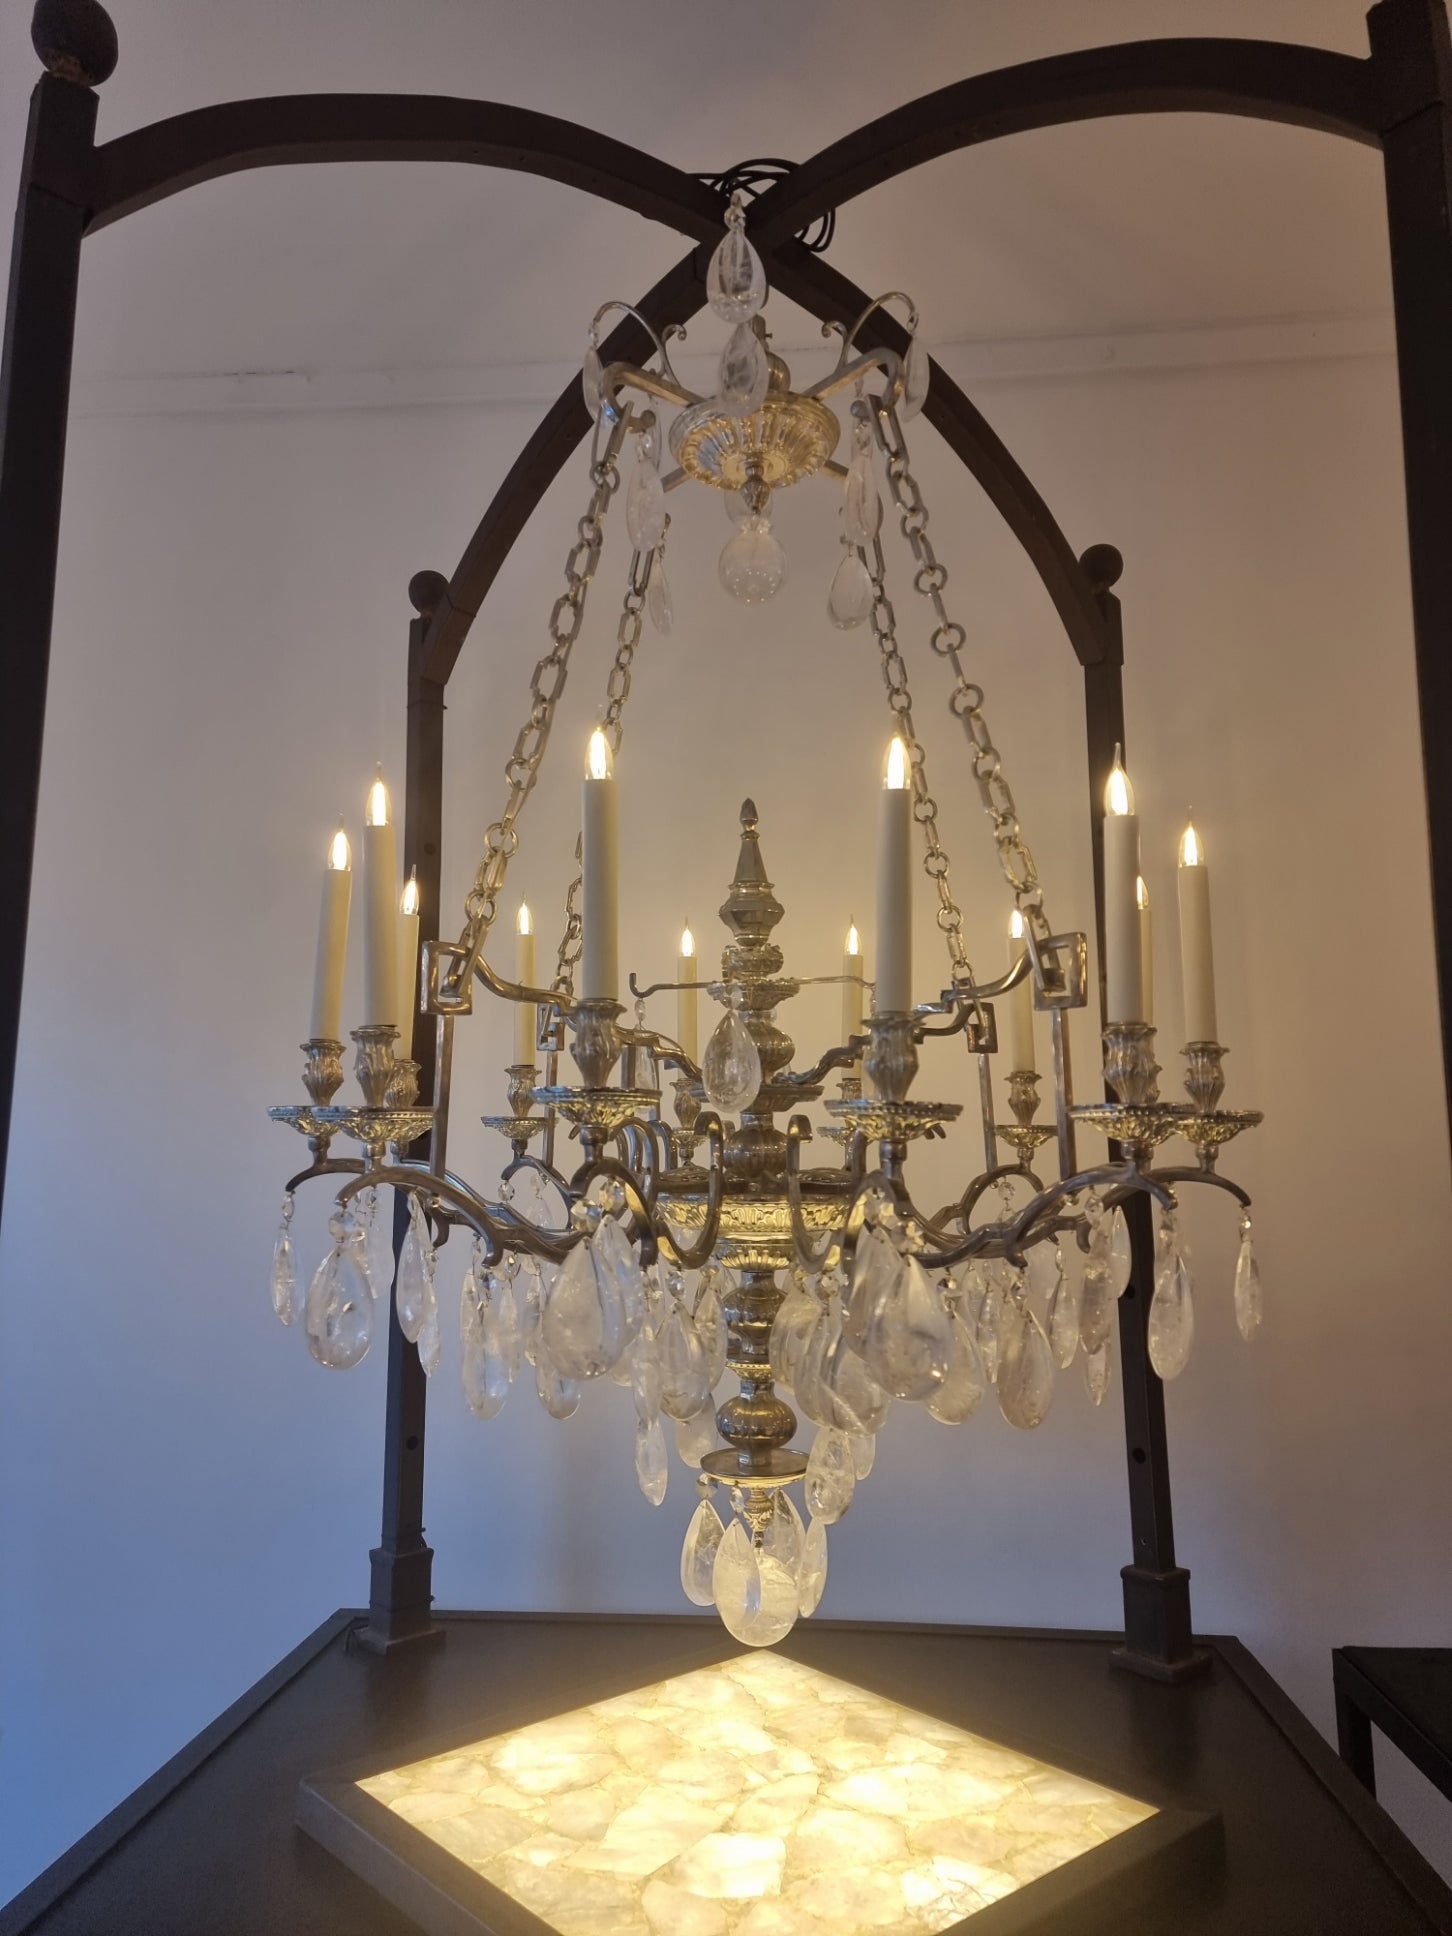 This chandelier is an original variation of the chain models that could be found in the 18th century, such as the Louis XVI period torchiere chandelier in the Château de Versailles.
Rock Crystal Chaine Chandelier of 12 Lights in custom
nickel